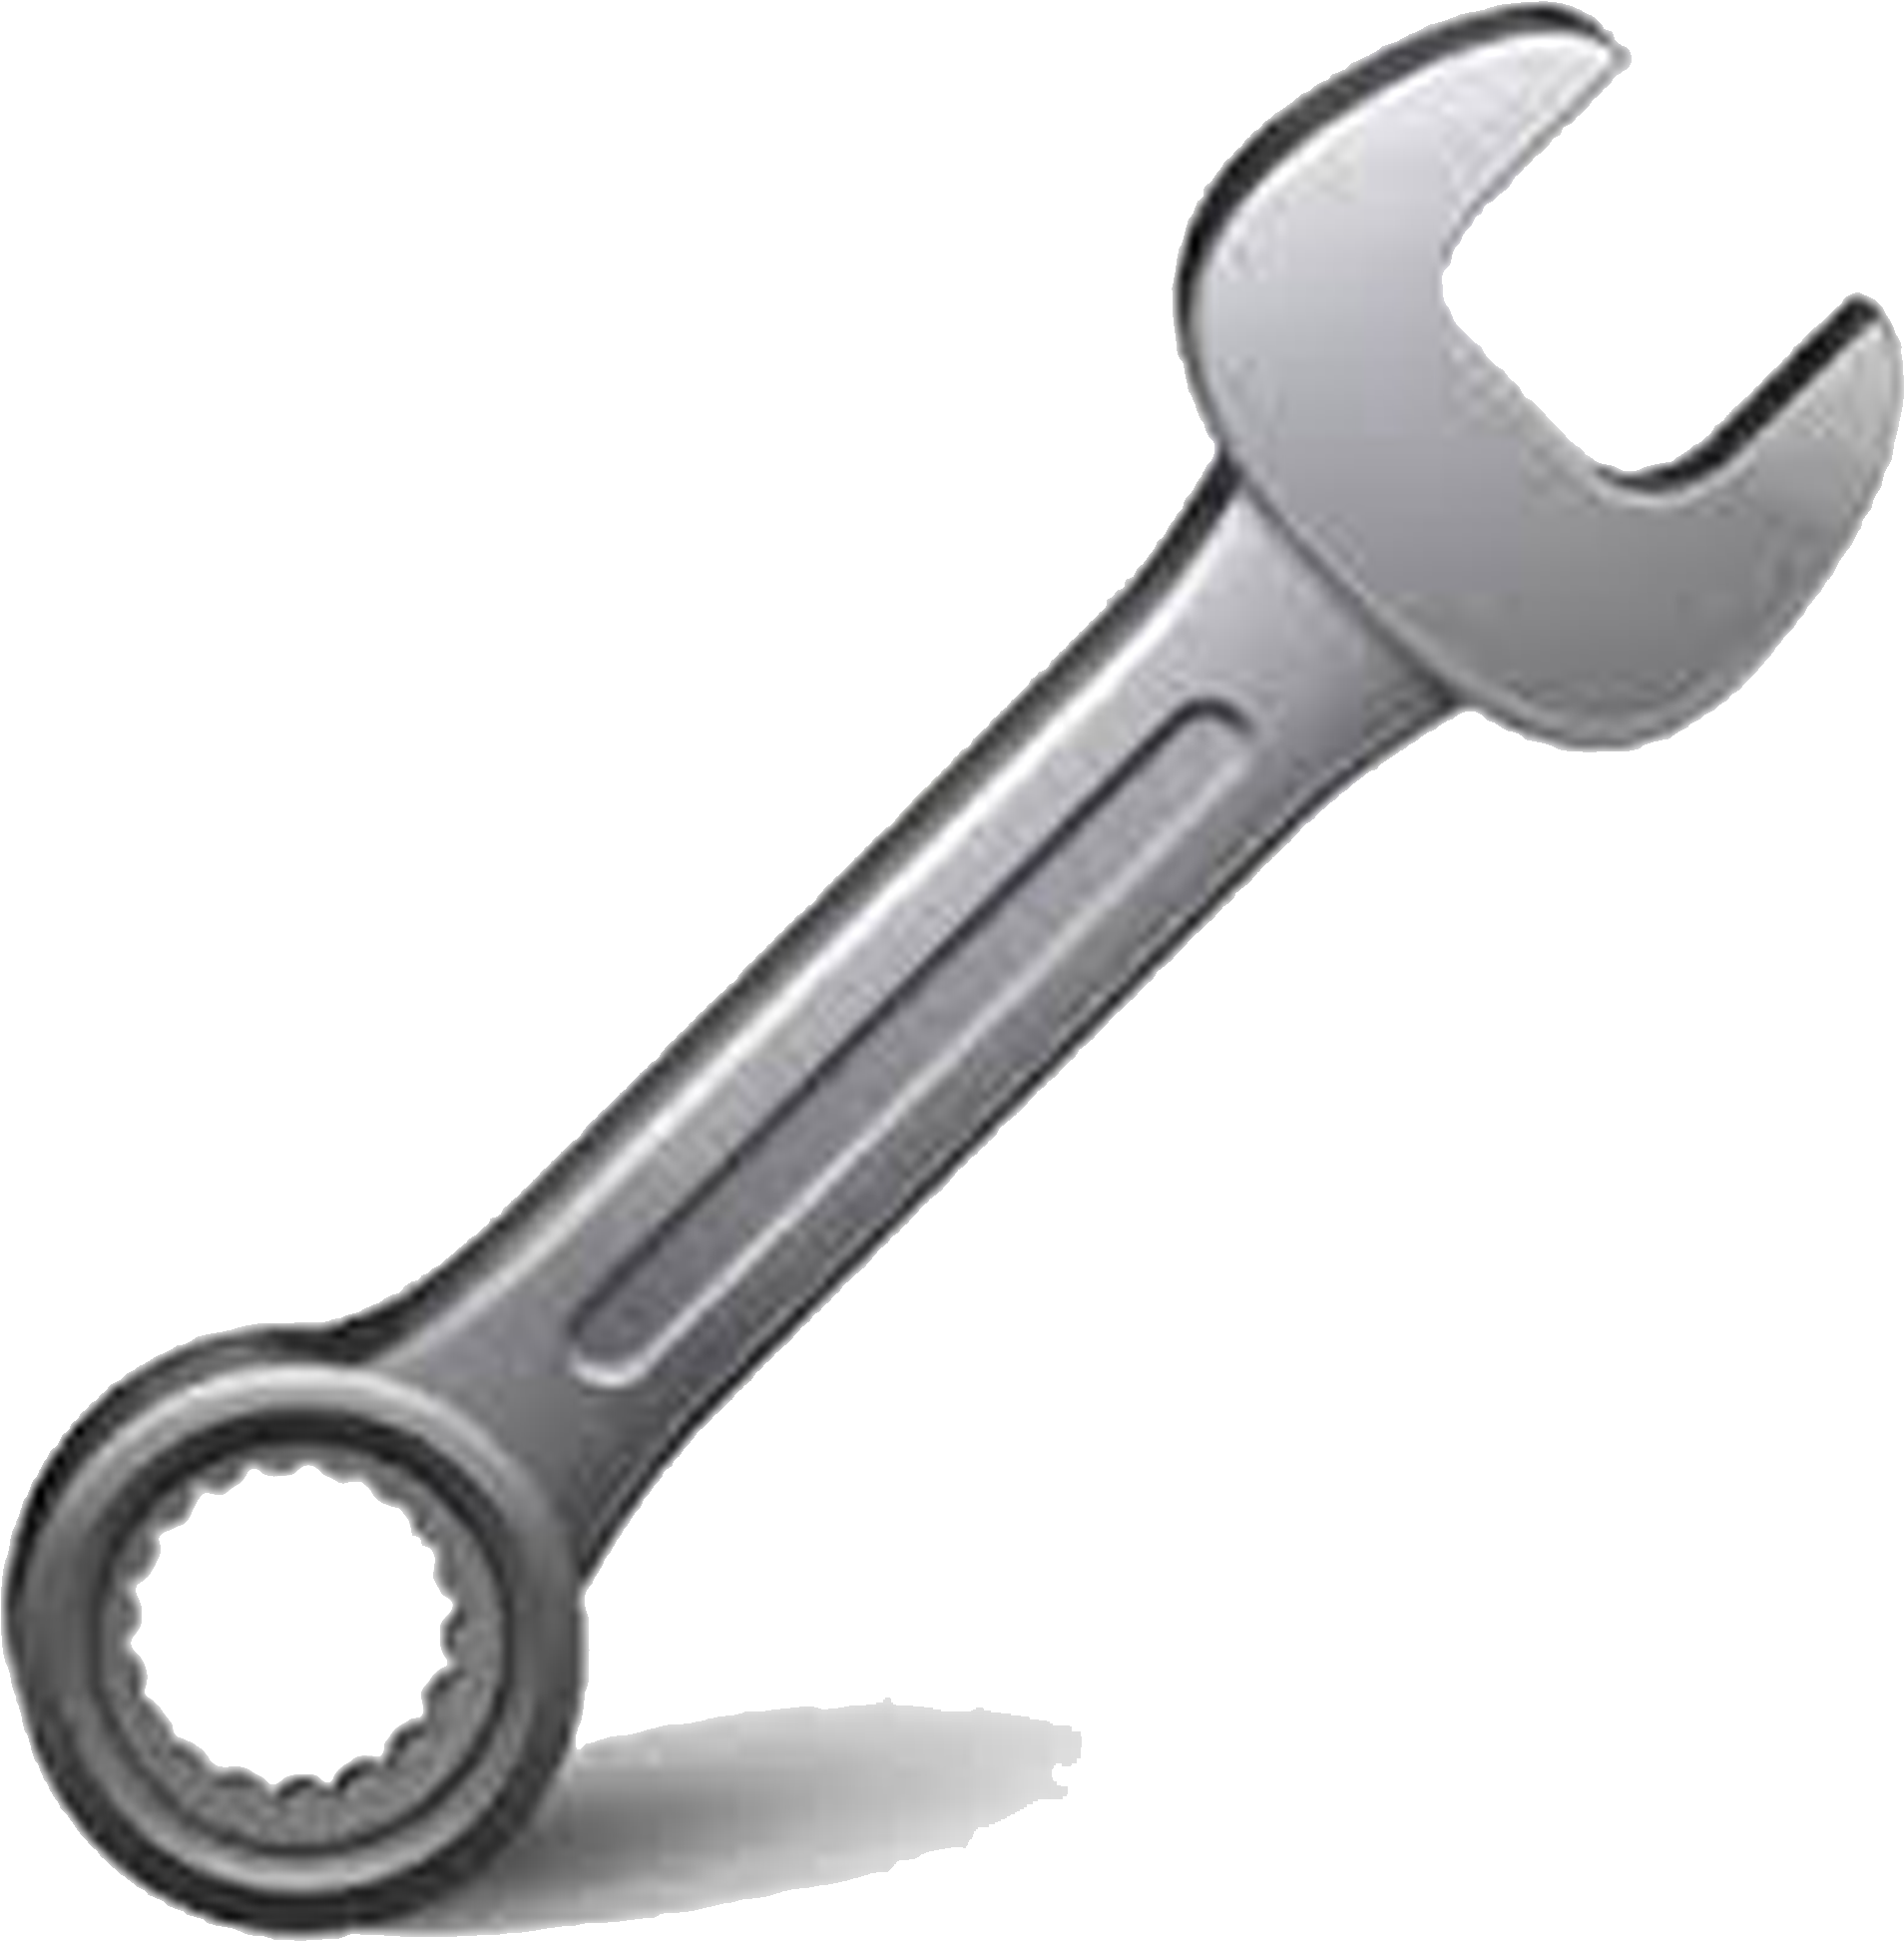 Spanners Tool Monkey Wrench Clip Art - Spanners Tool Monkey Wrench Clip Art (2000x2000)